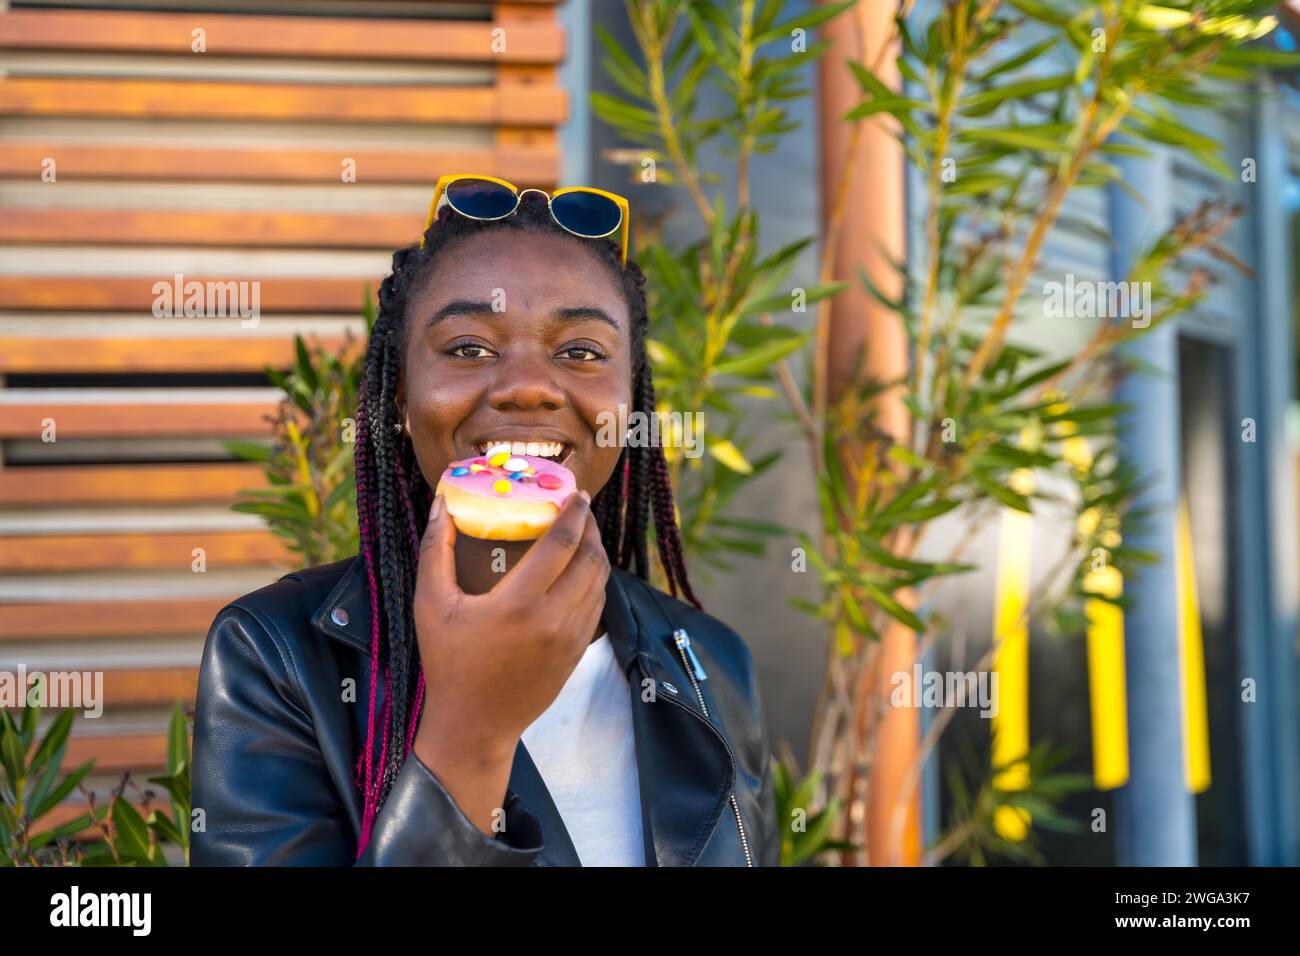 African cute woman eating a colorful doughnut sitting outdoors next to a shop Stock Photo